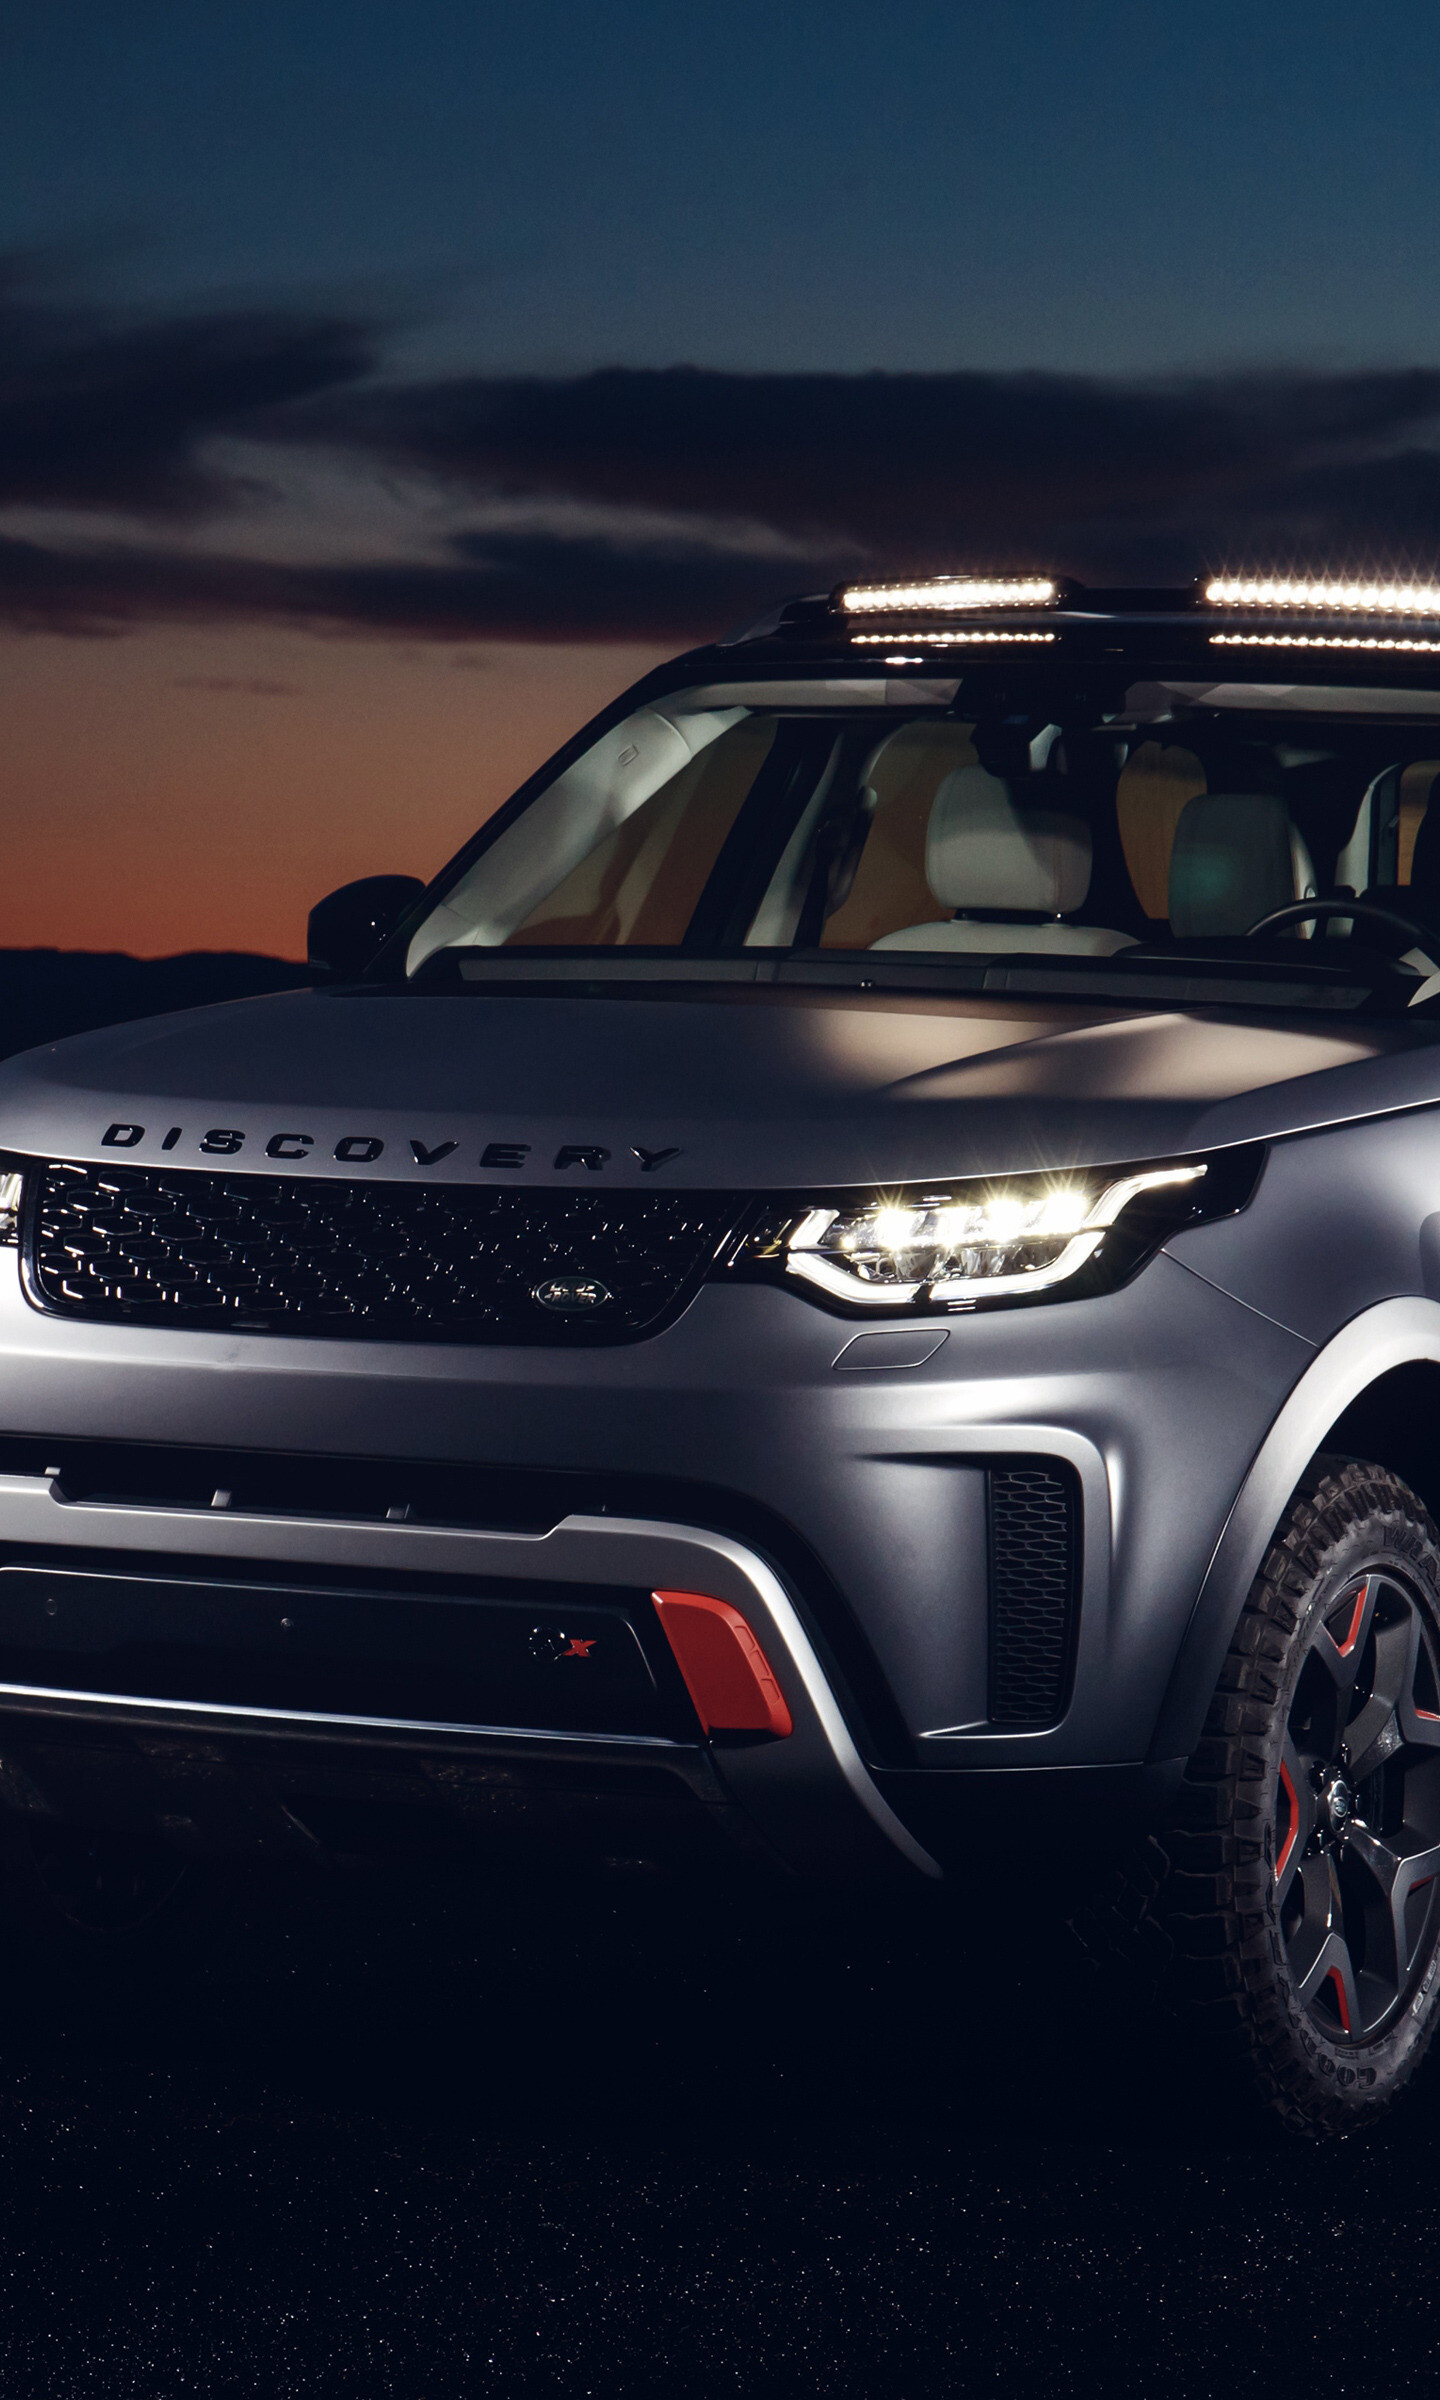 Land Rover: 2018 Discovery SVX, SUV car, The British car manufacturer. 1440x2400 HD Wallpaper.